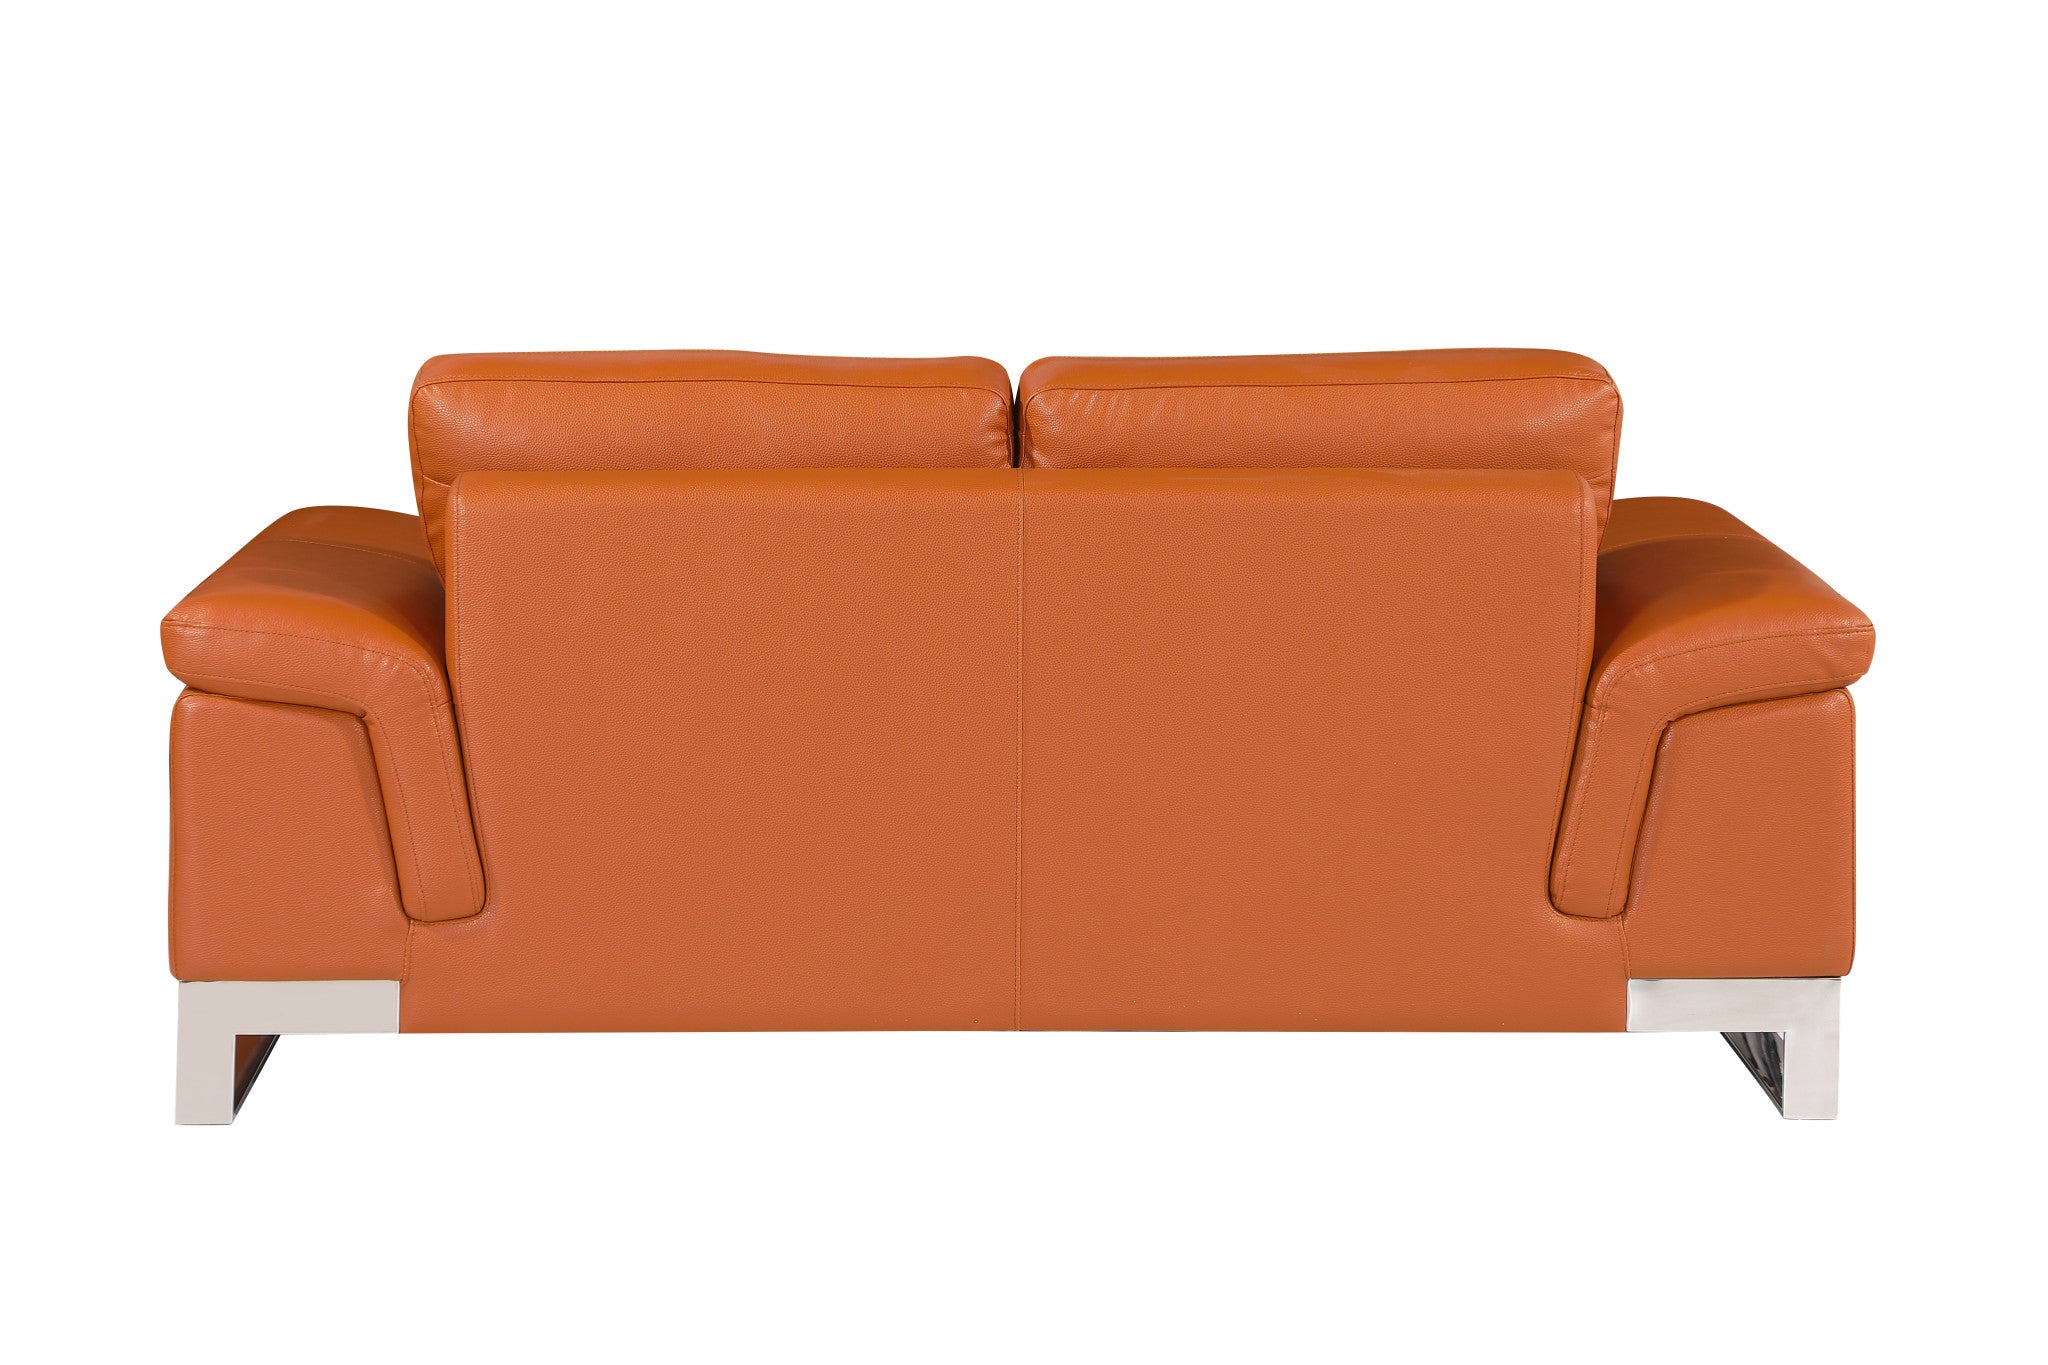 73'" X 39'"  X 32'" Modern Camel Leather Sofa And Loveseat